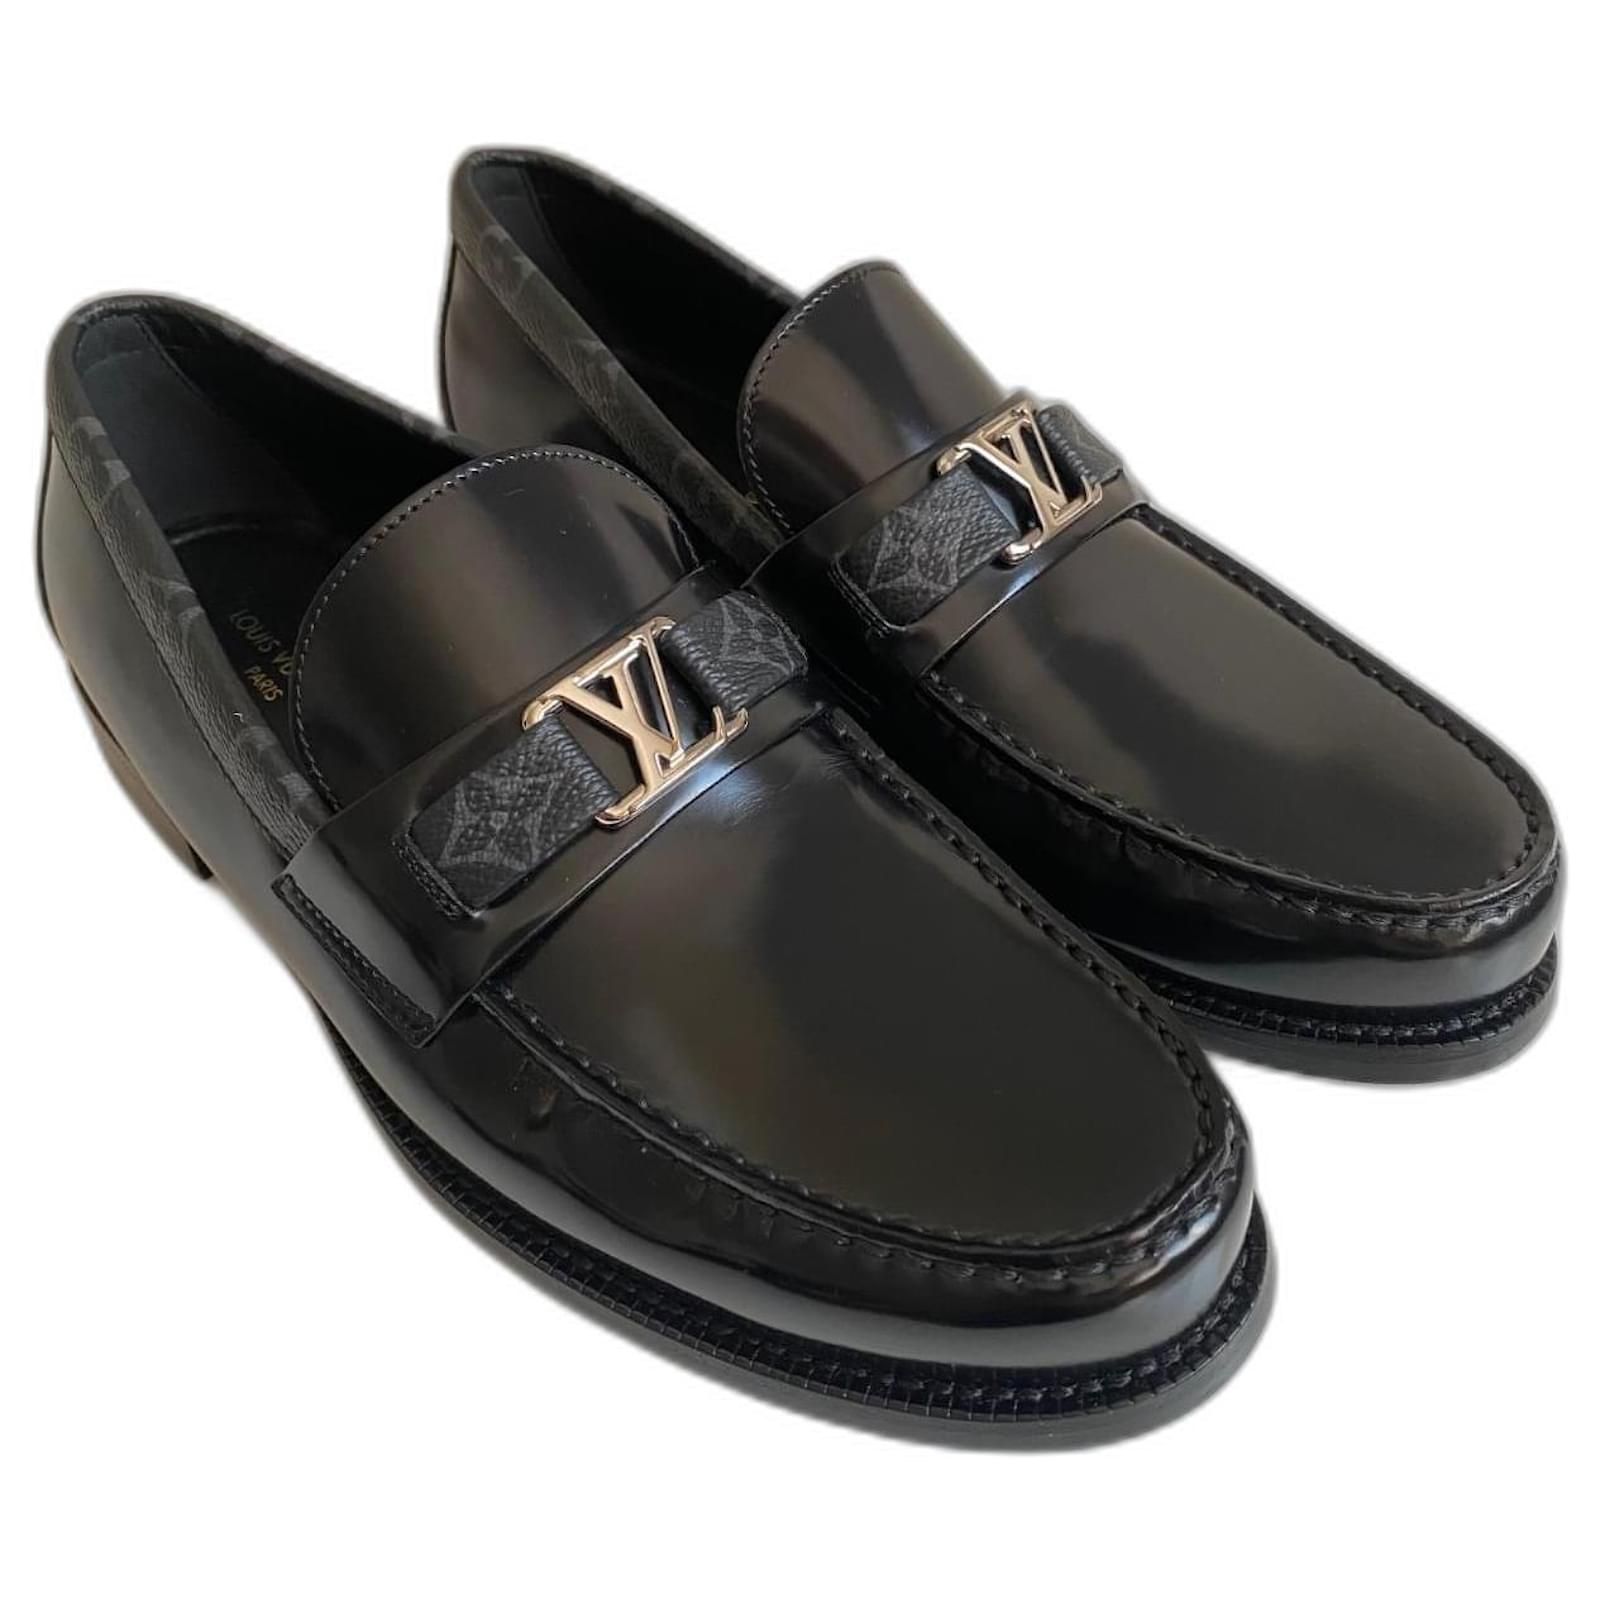 Loafers Slip Ons Louis Vuitton Major Loafers Size 41 FR